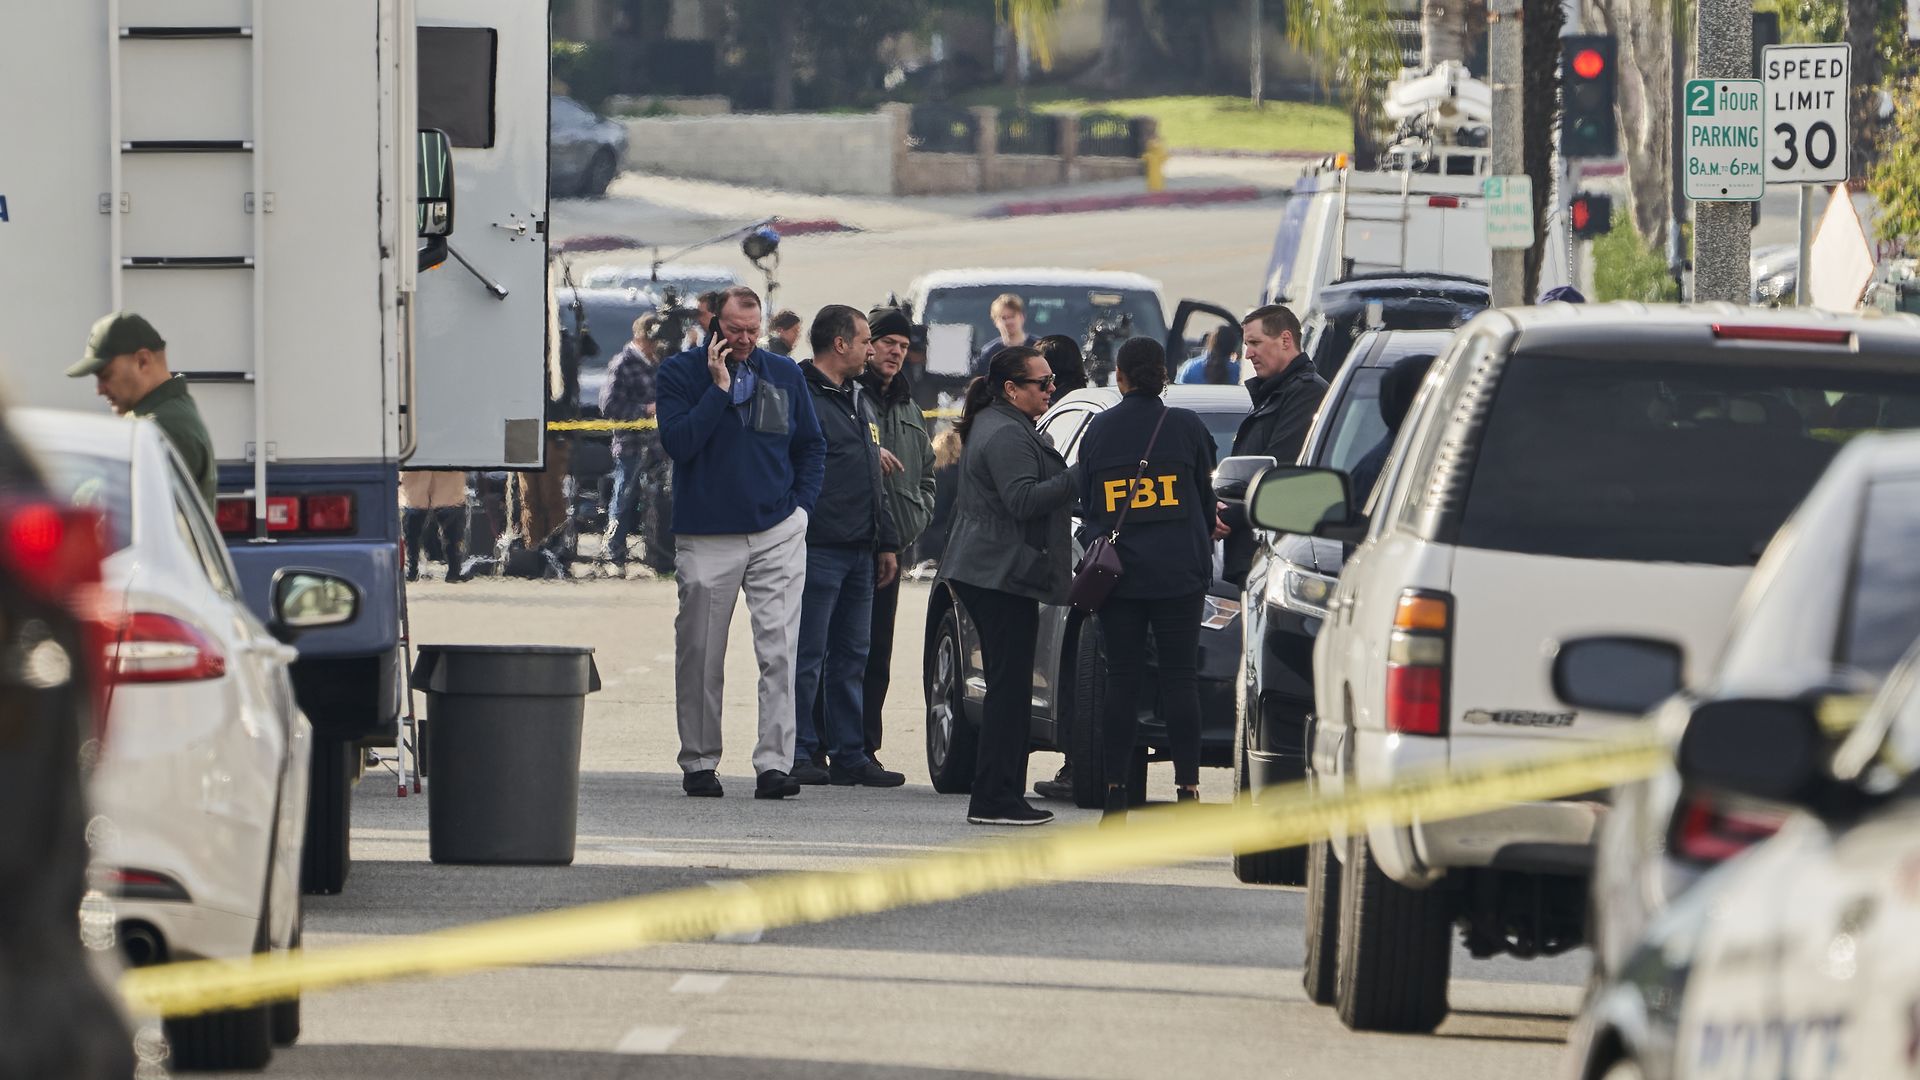 FBI investigators gather in between cars and palm trees on a street during the day in Monterey Park, California in the wake of a mass shooting.